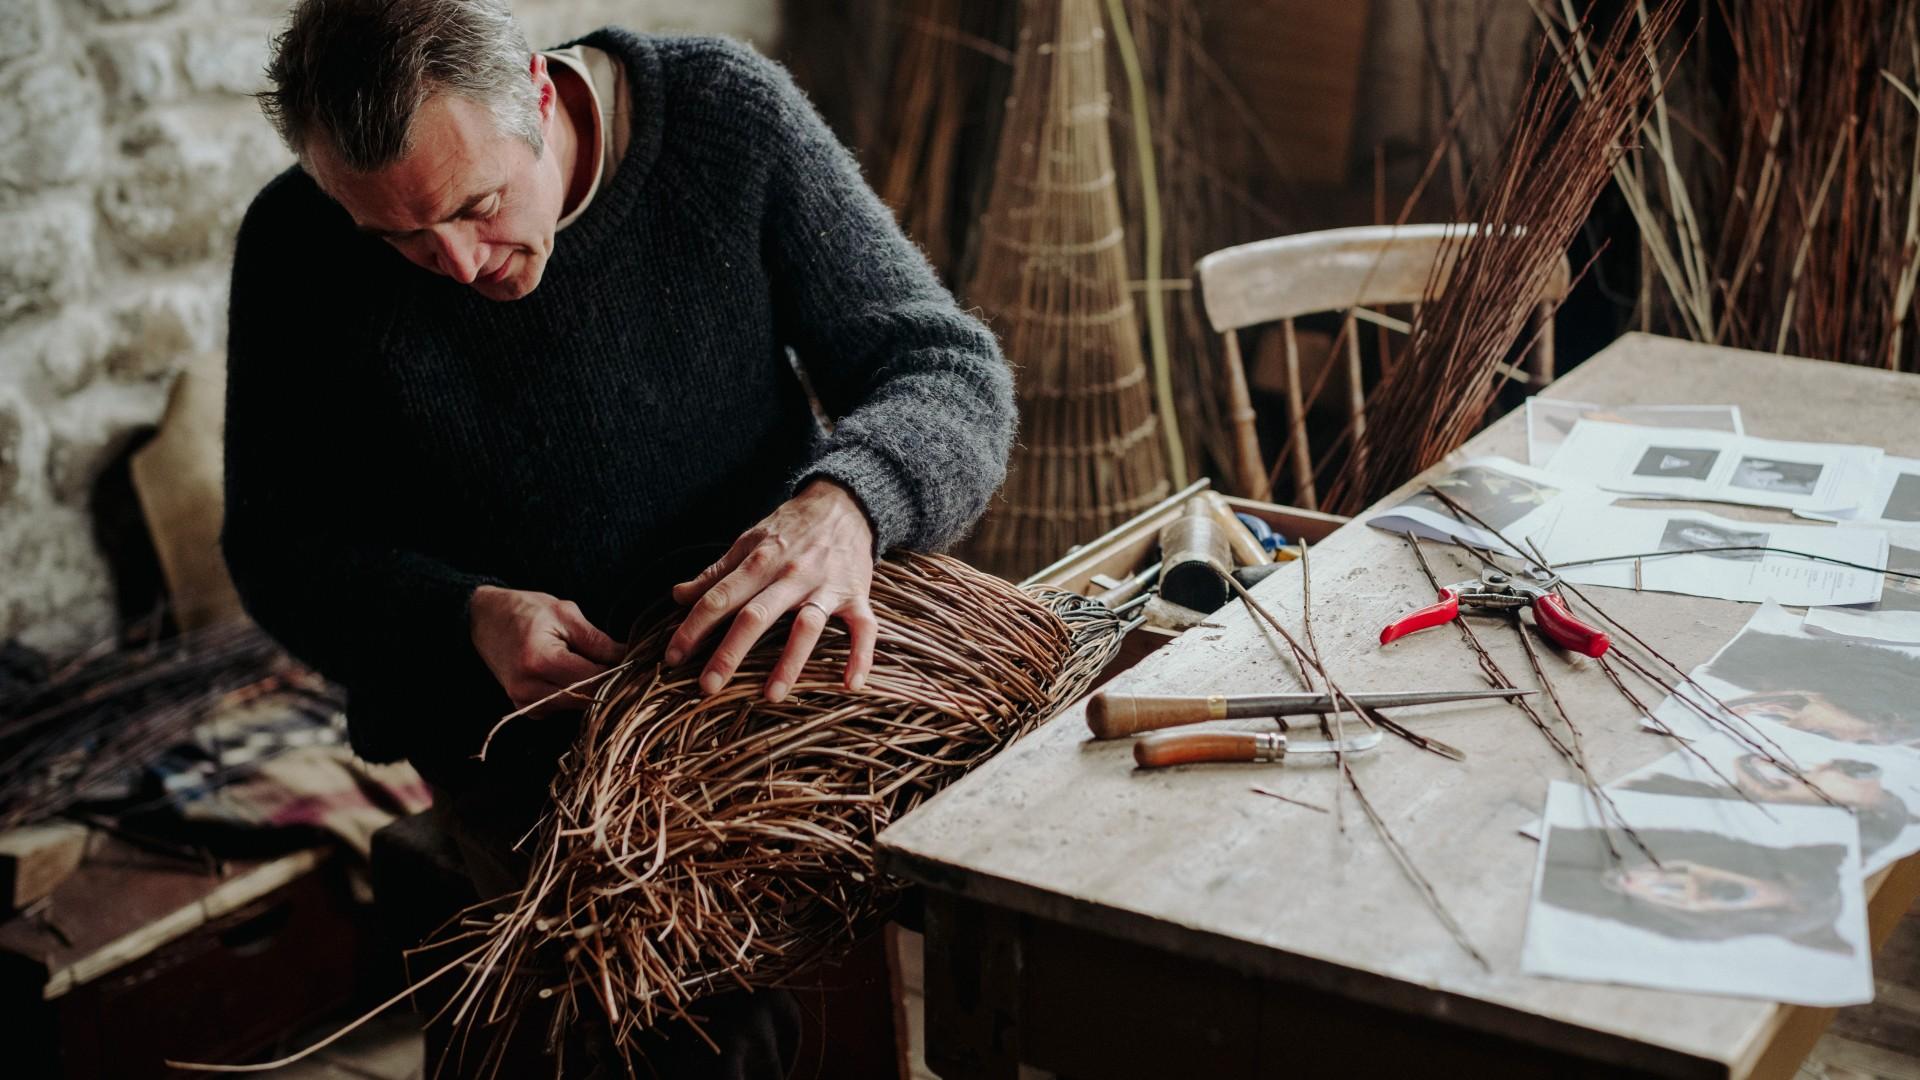 A man sits weaving willow together in a basket-like formation.